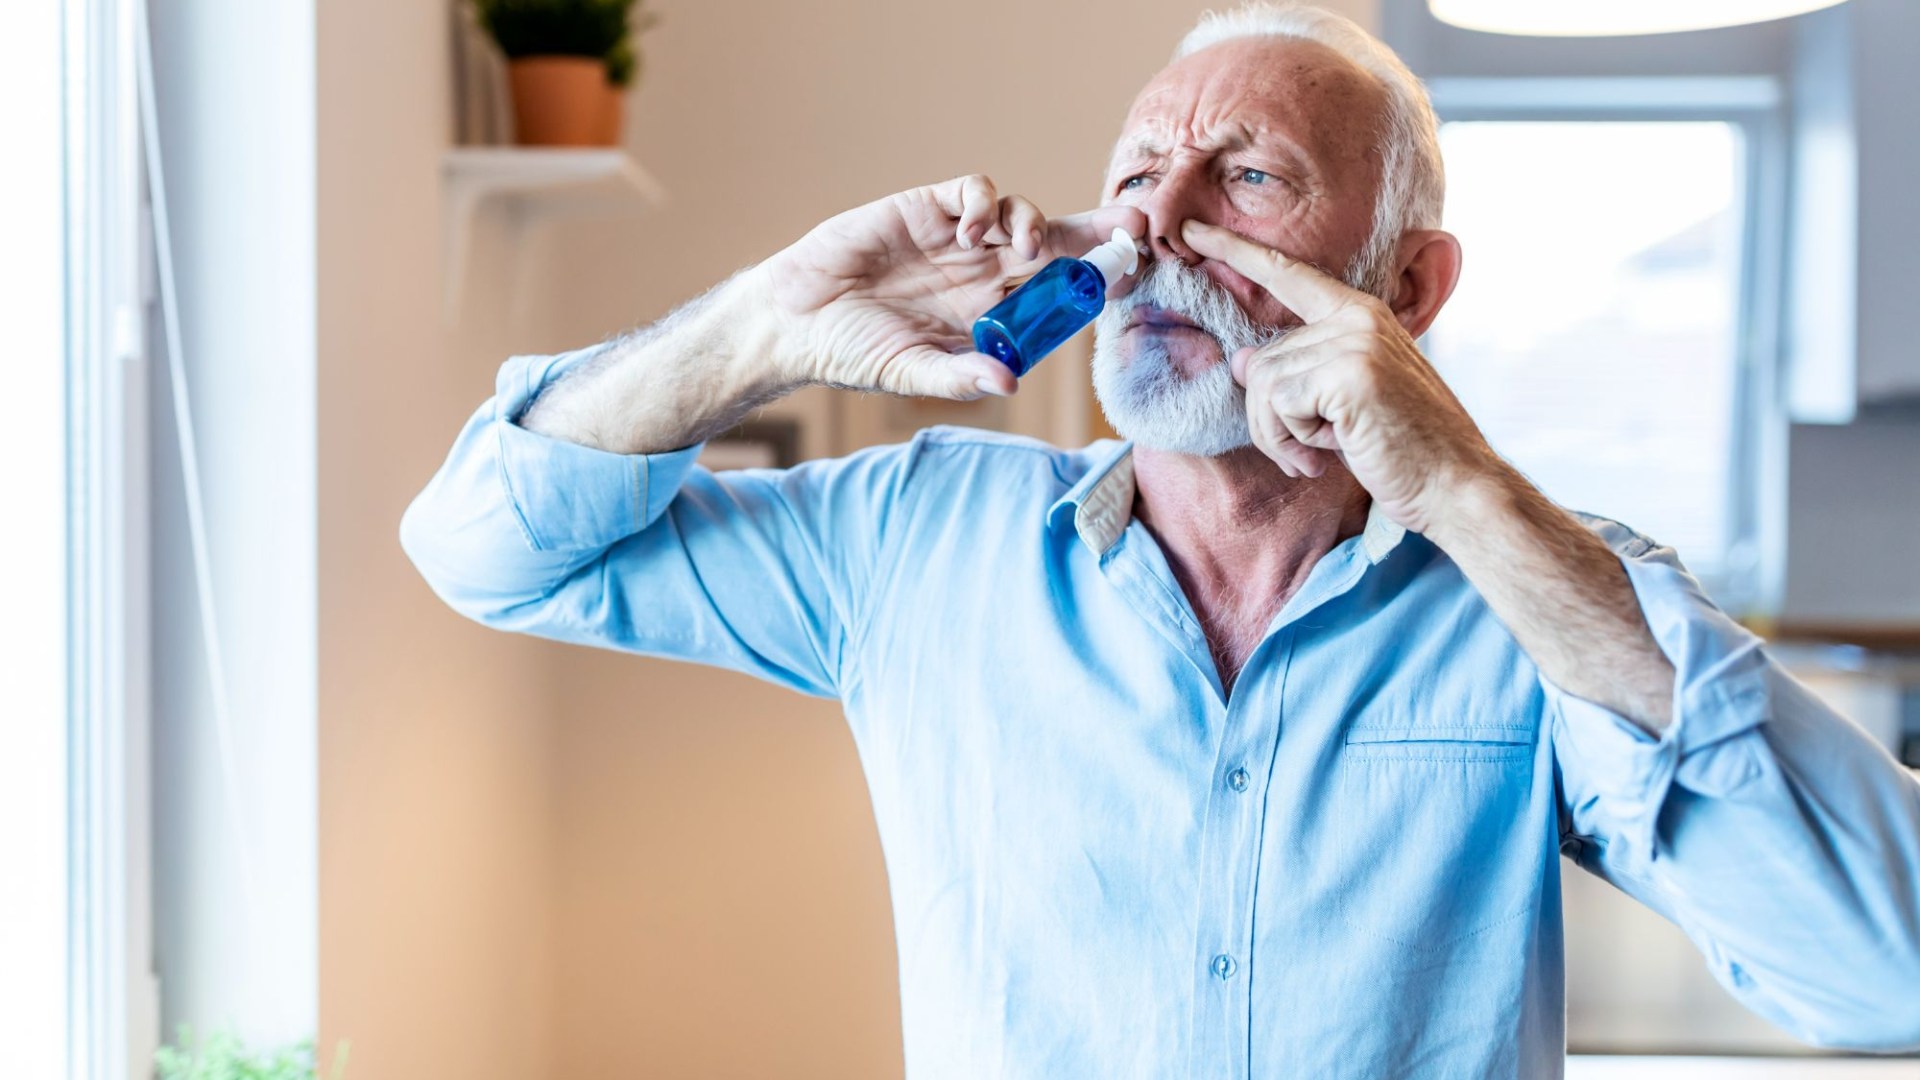 Single-dose nasal spray ‘washes the brain’ of toxic Alzheimer’s proteins – paving the way for breakthrough treatment [Video]